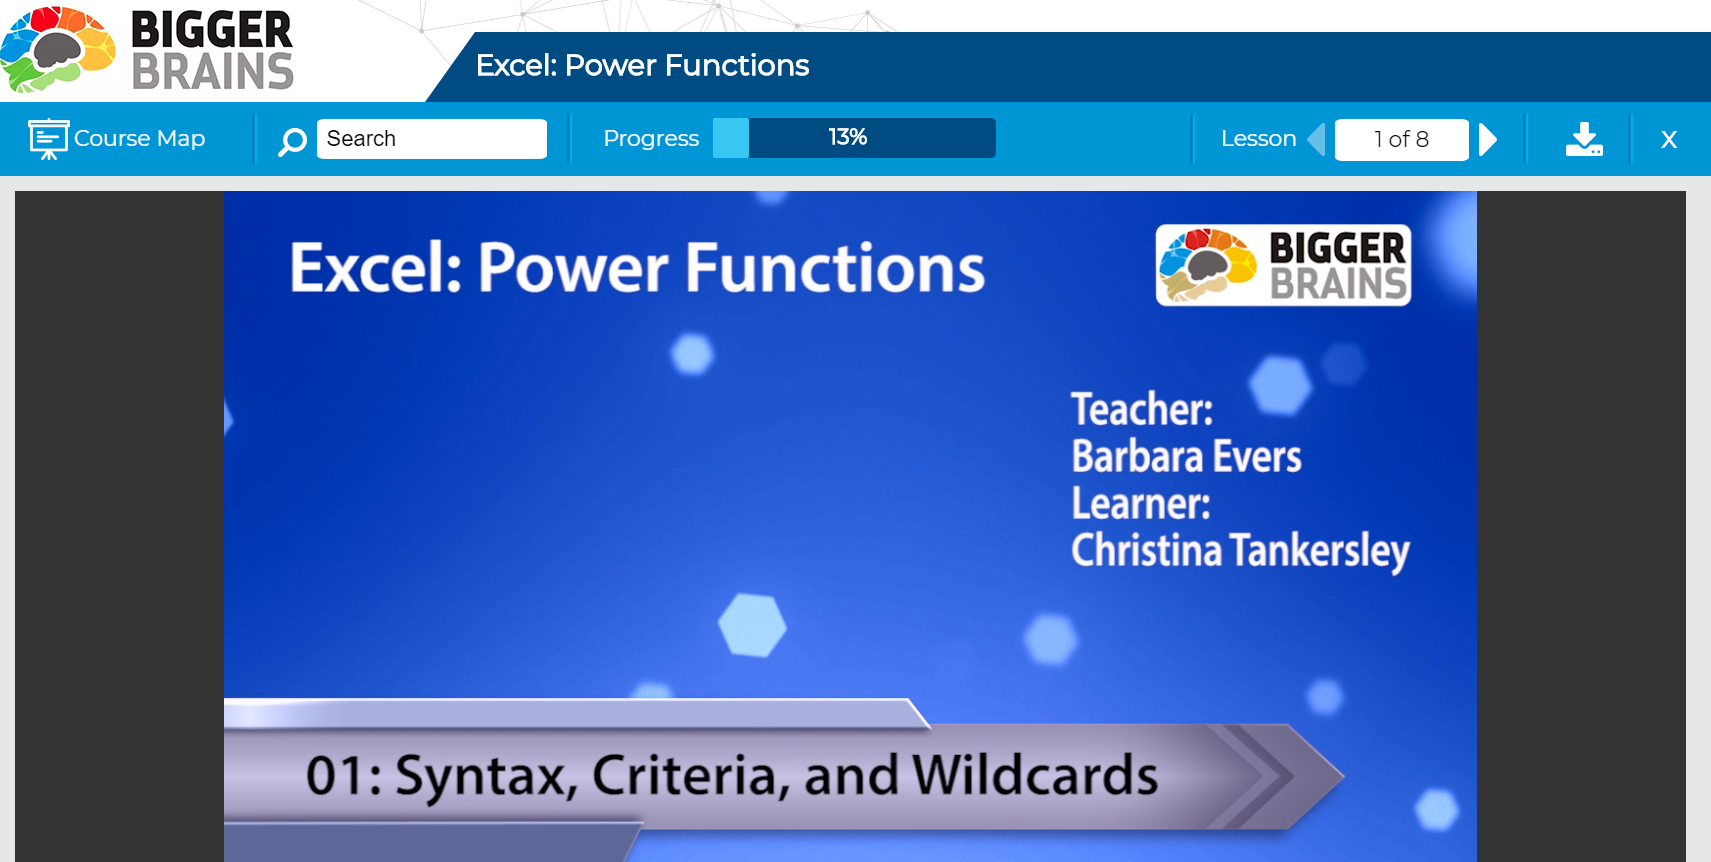 Excel: Power Functions